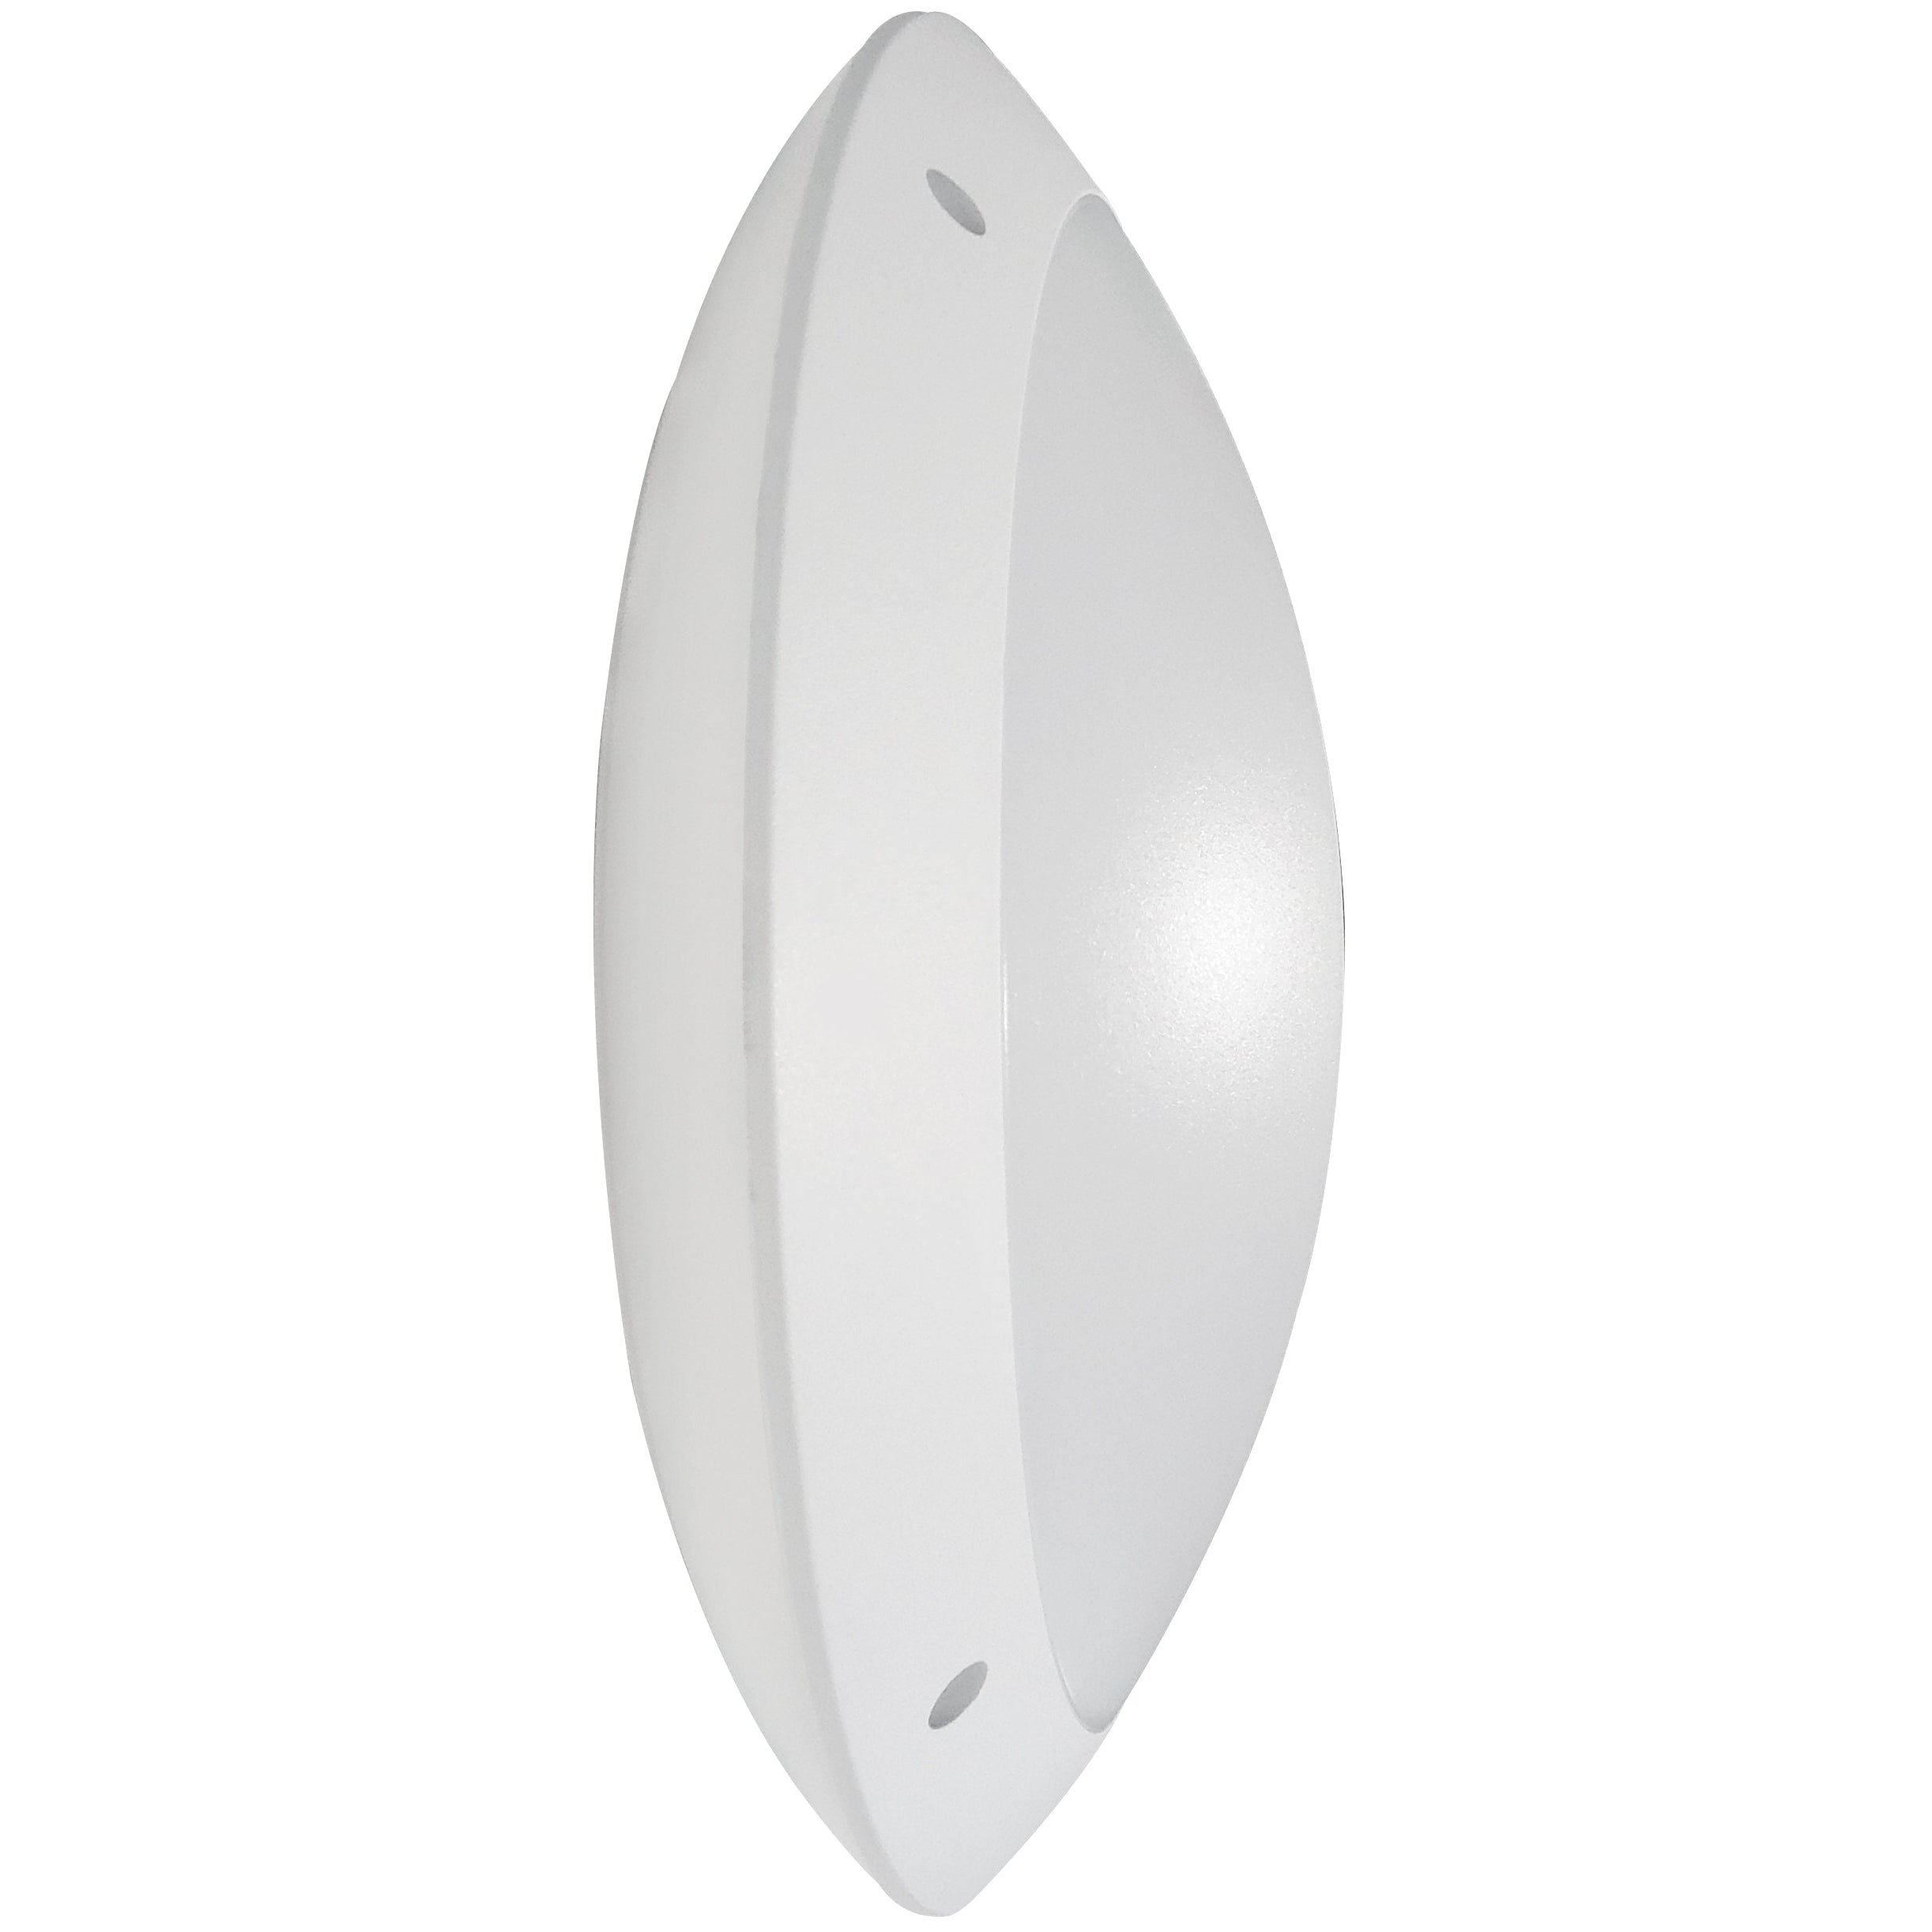 Eterna SHFULLMWWH LED Amenity Ceiling/Wall Light With Microwave White